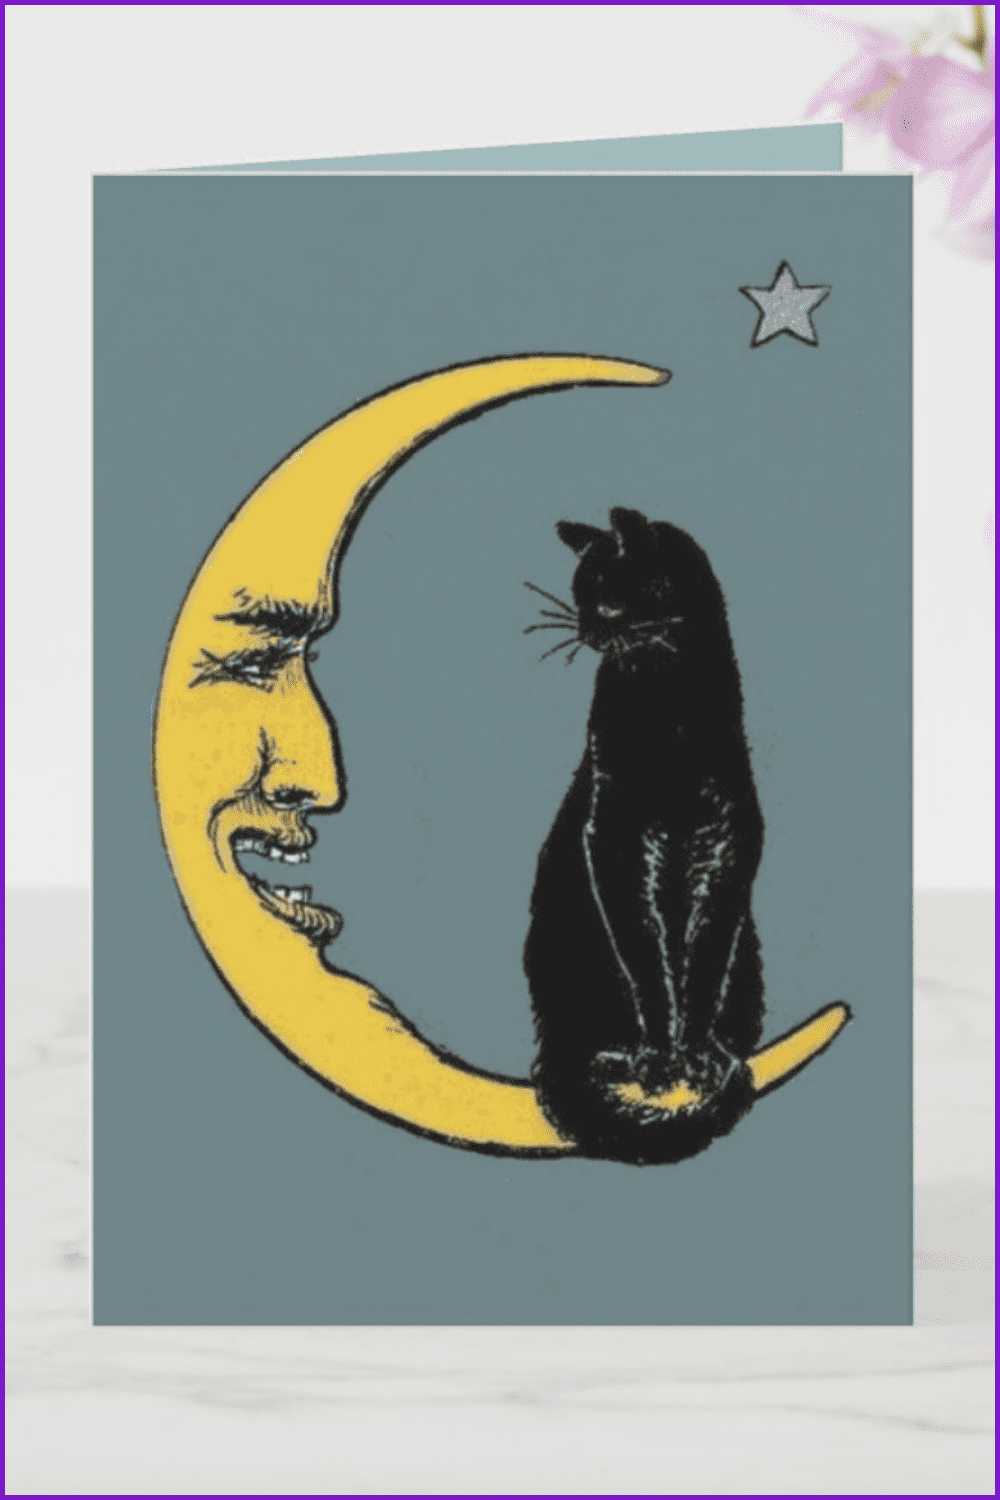 Black cat sits on the horn of the moon.